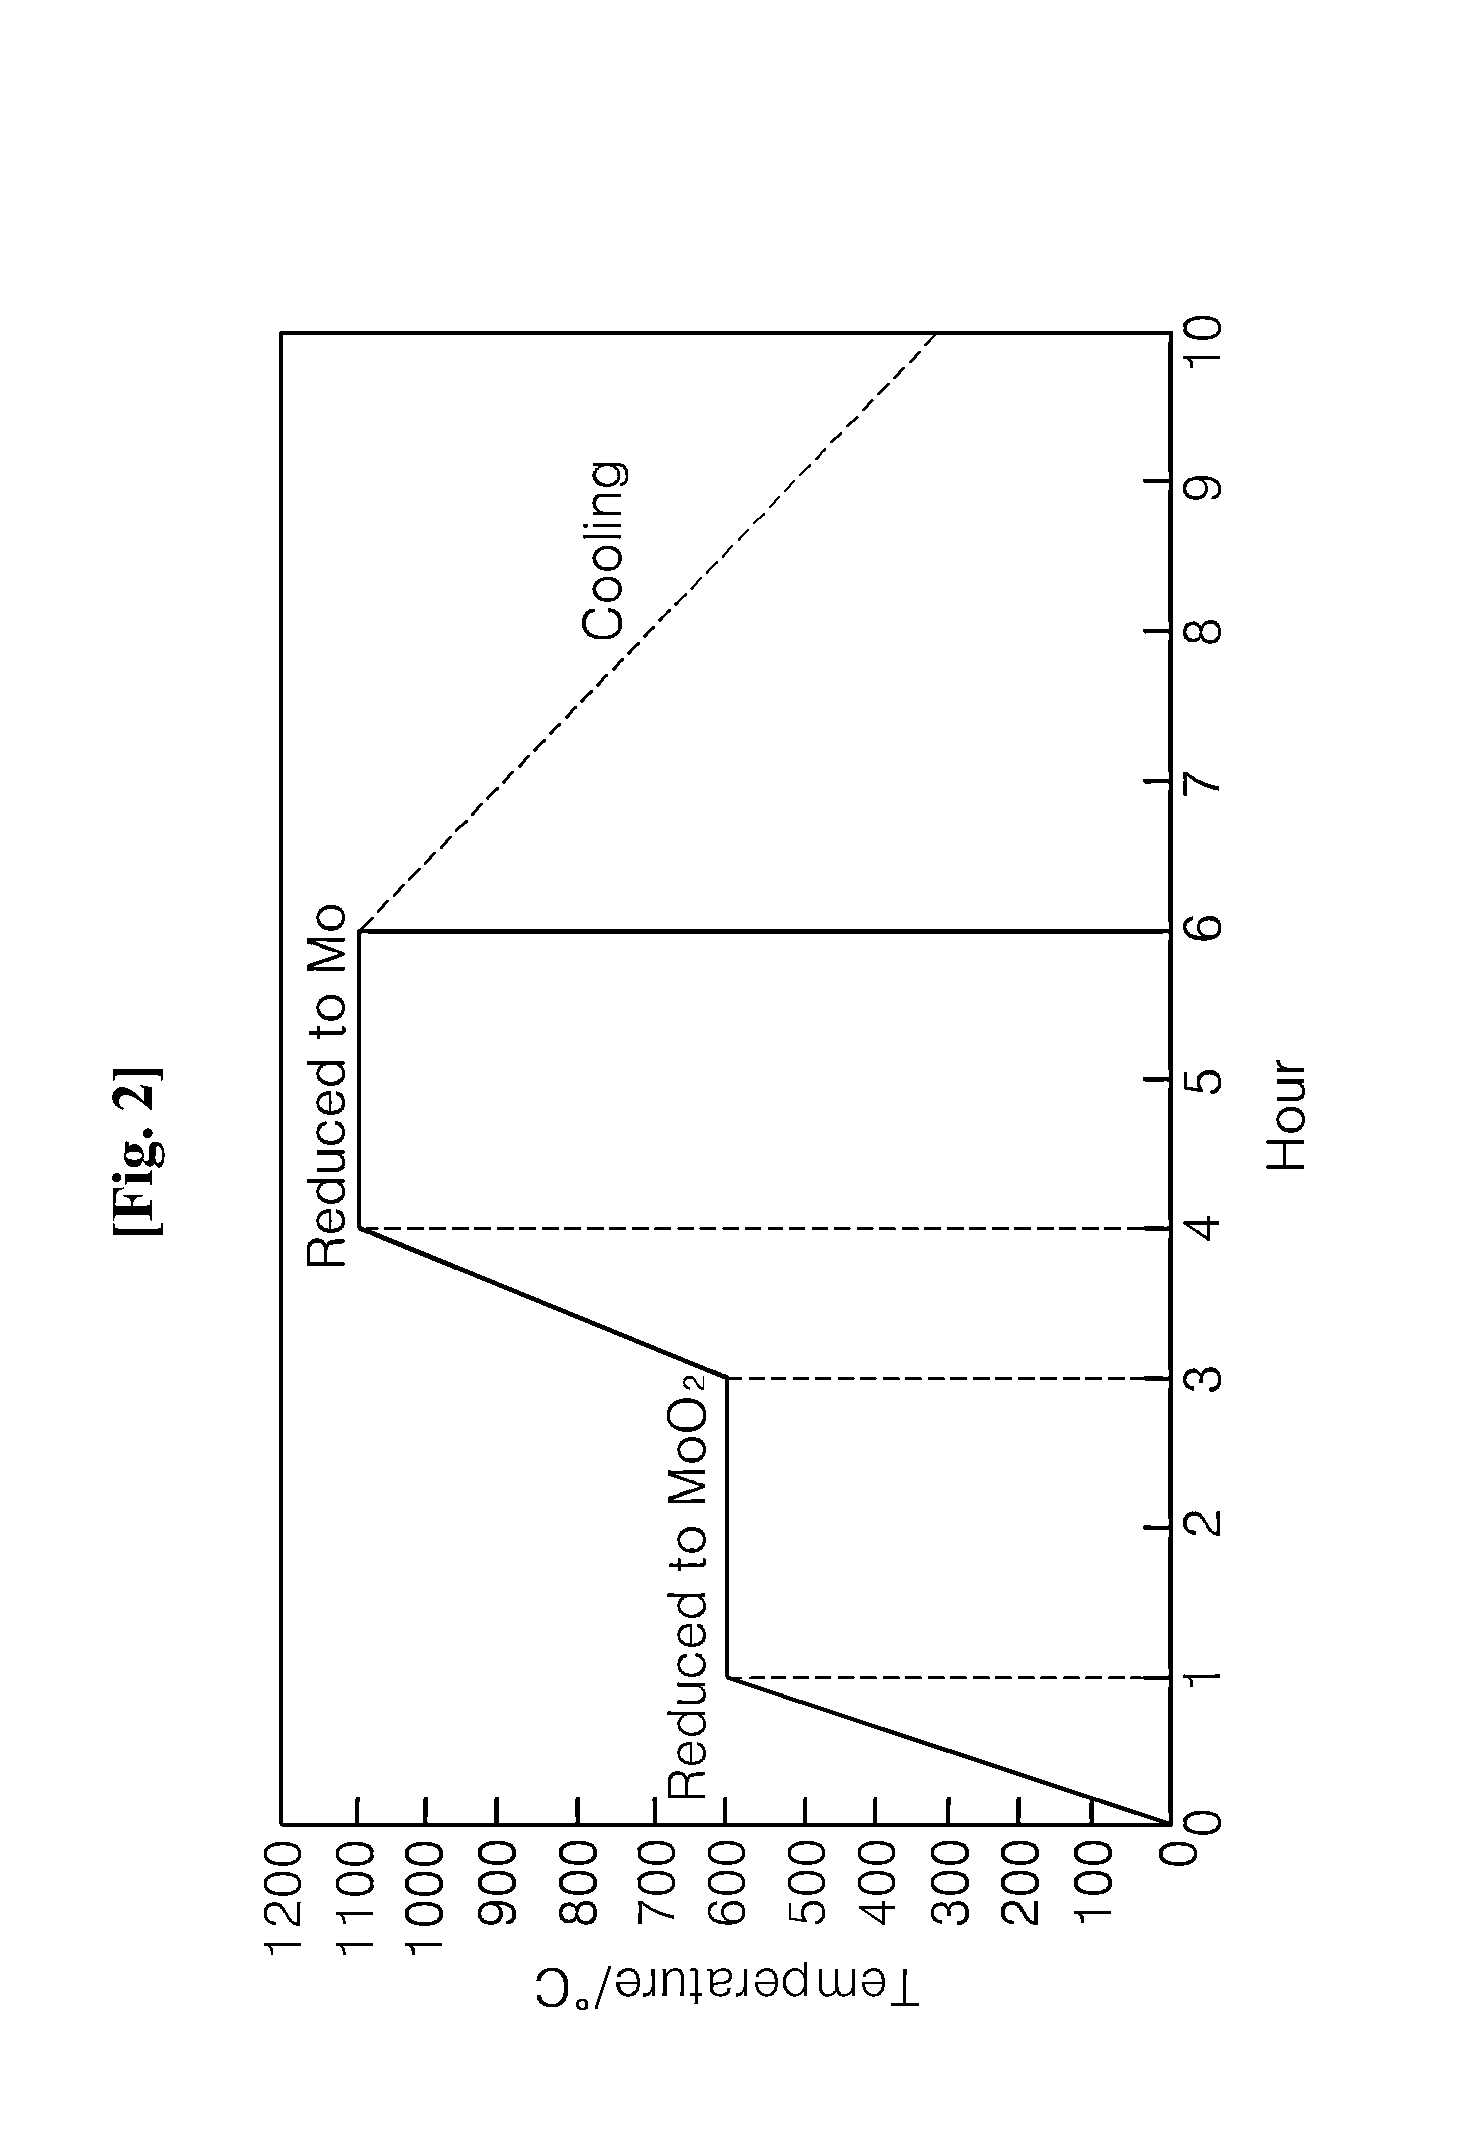 Method of producing low oxygen-content molybdenum powder by reducing molybdenum trioxide